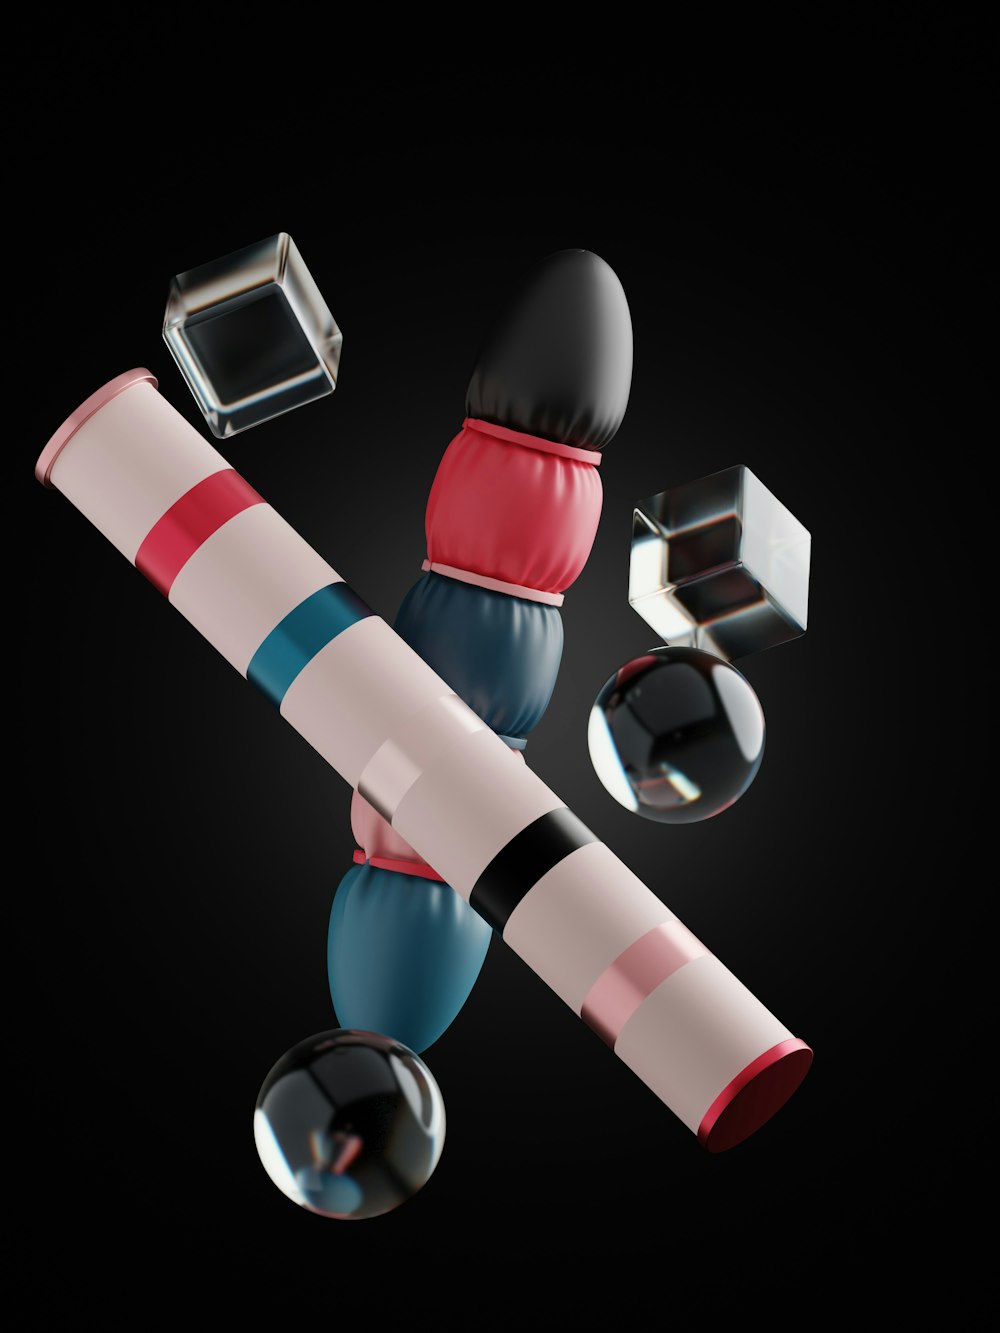 a black background with a red, white, and blue object